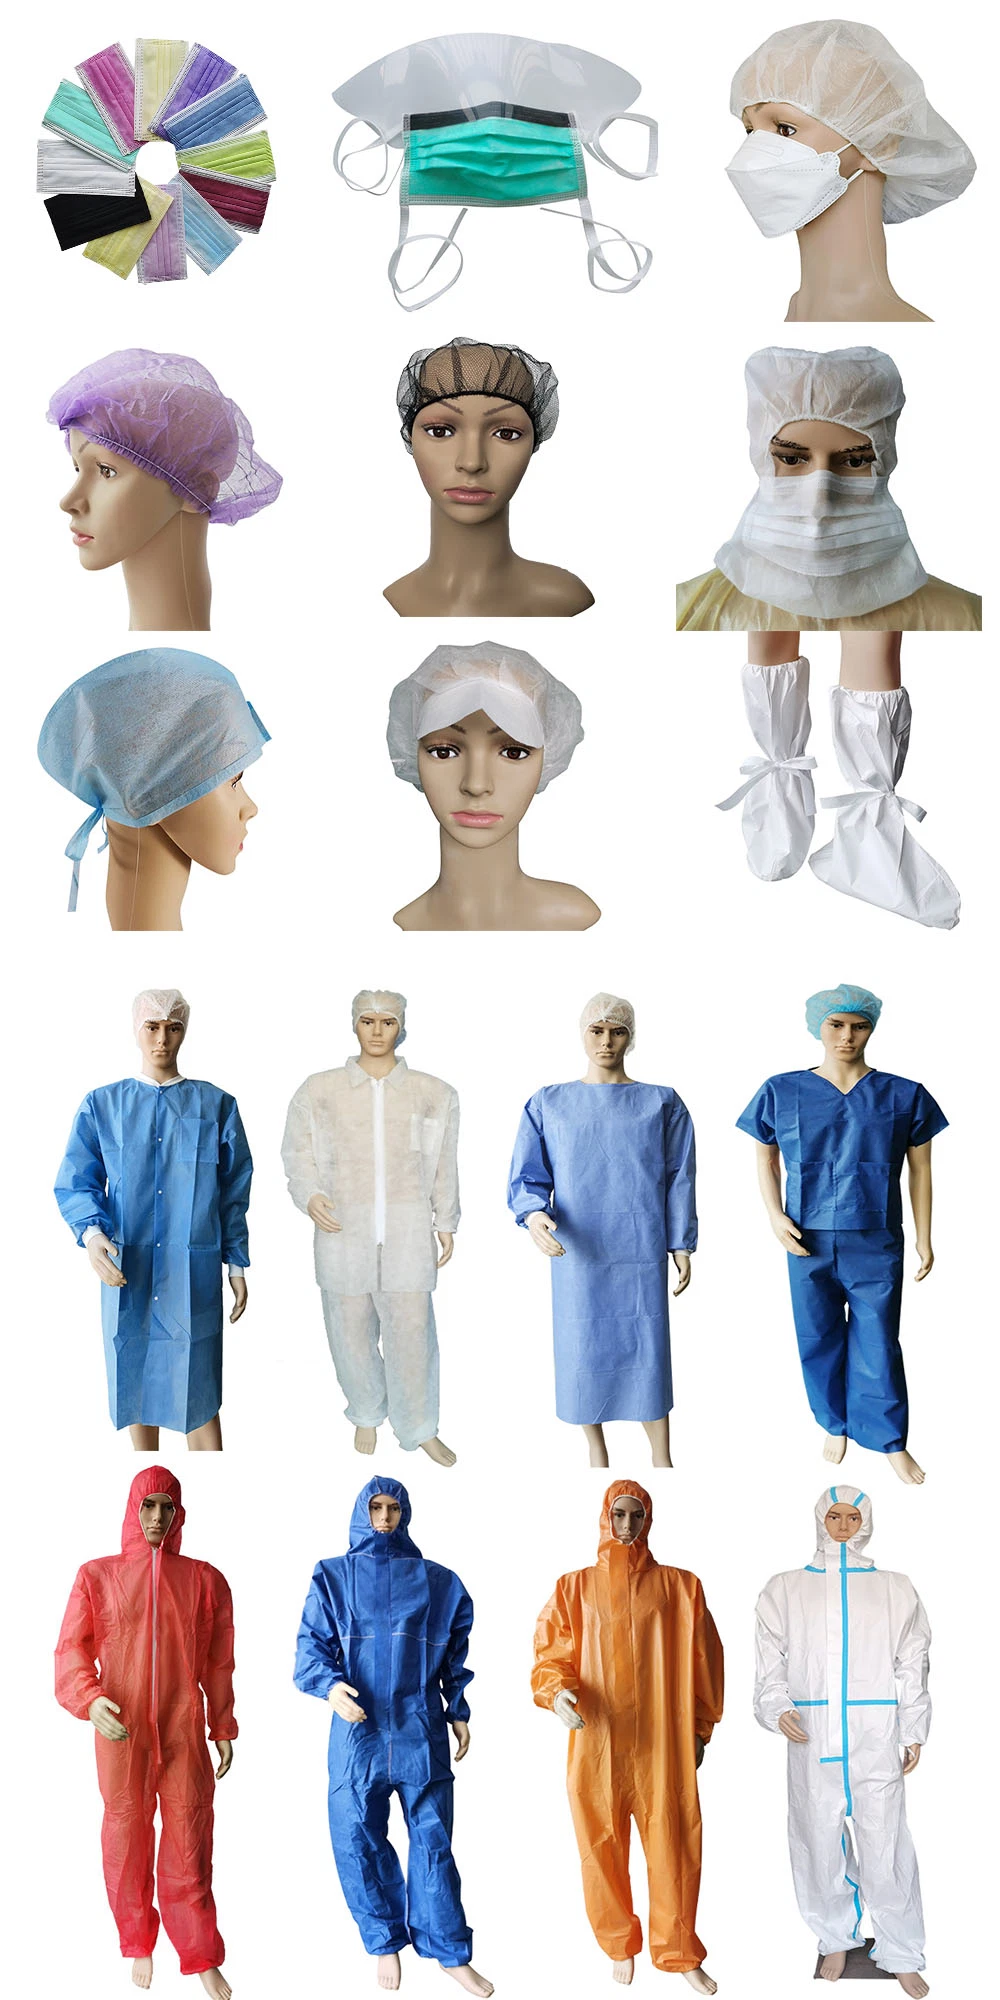 Safety Antistatic Liquid-Proof Xs-4XL Manufacturer SMS/SMMS Knitted Cuffs Disposable Operating Room Hospital Medical Doctor Lab Coat